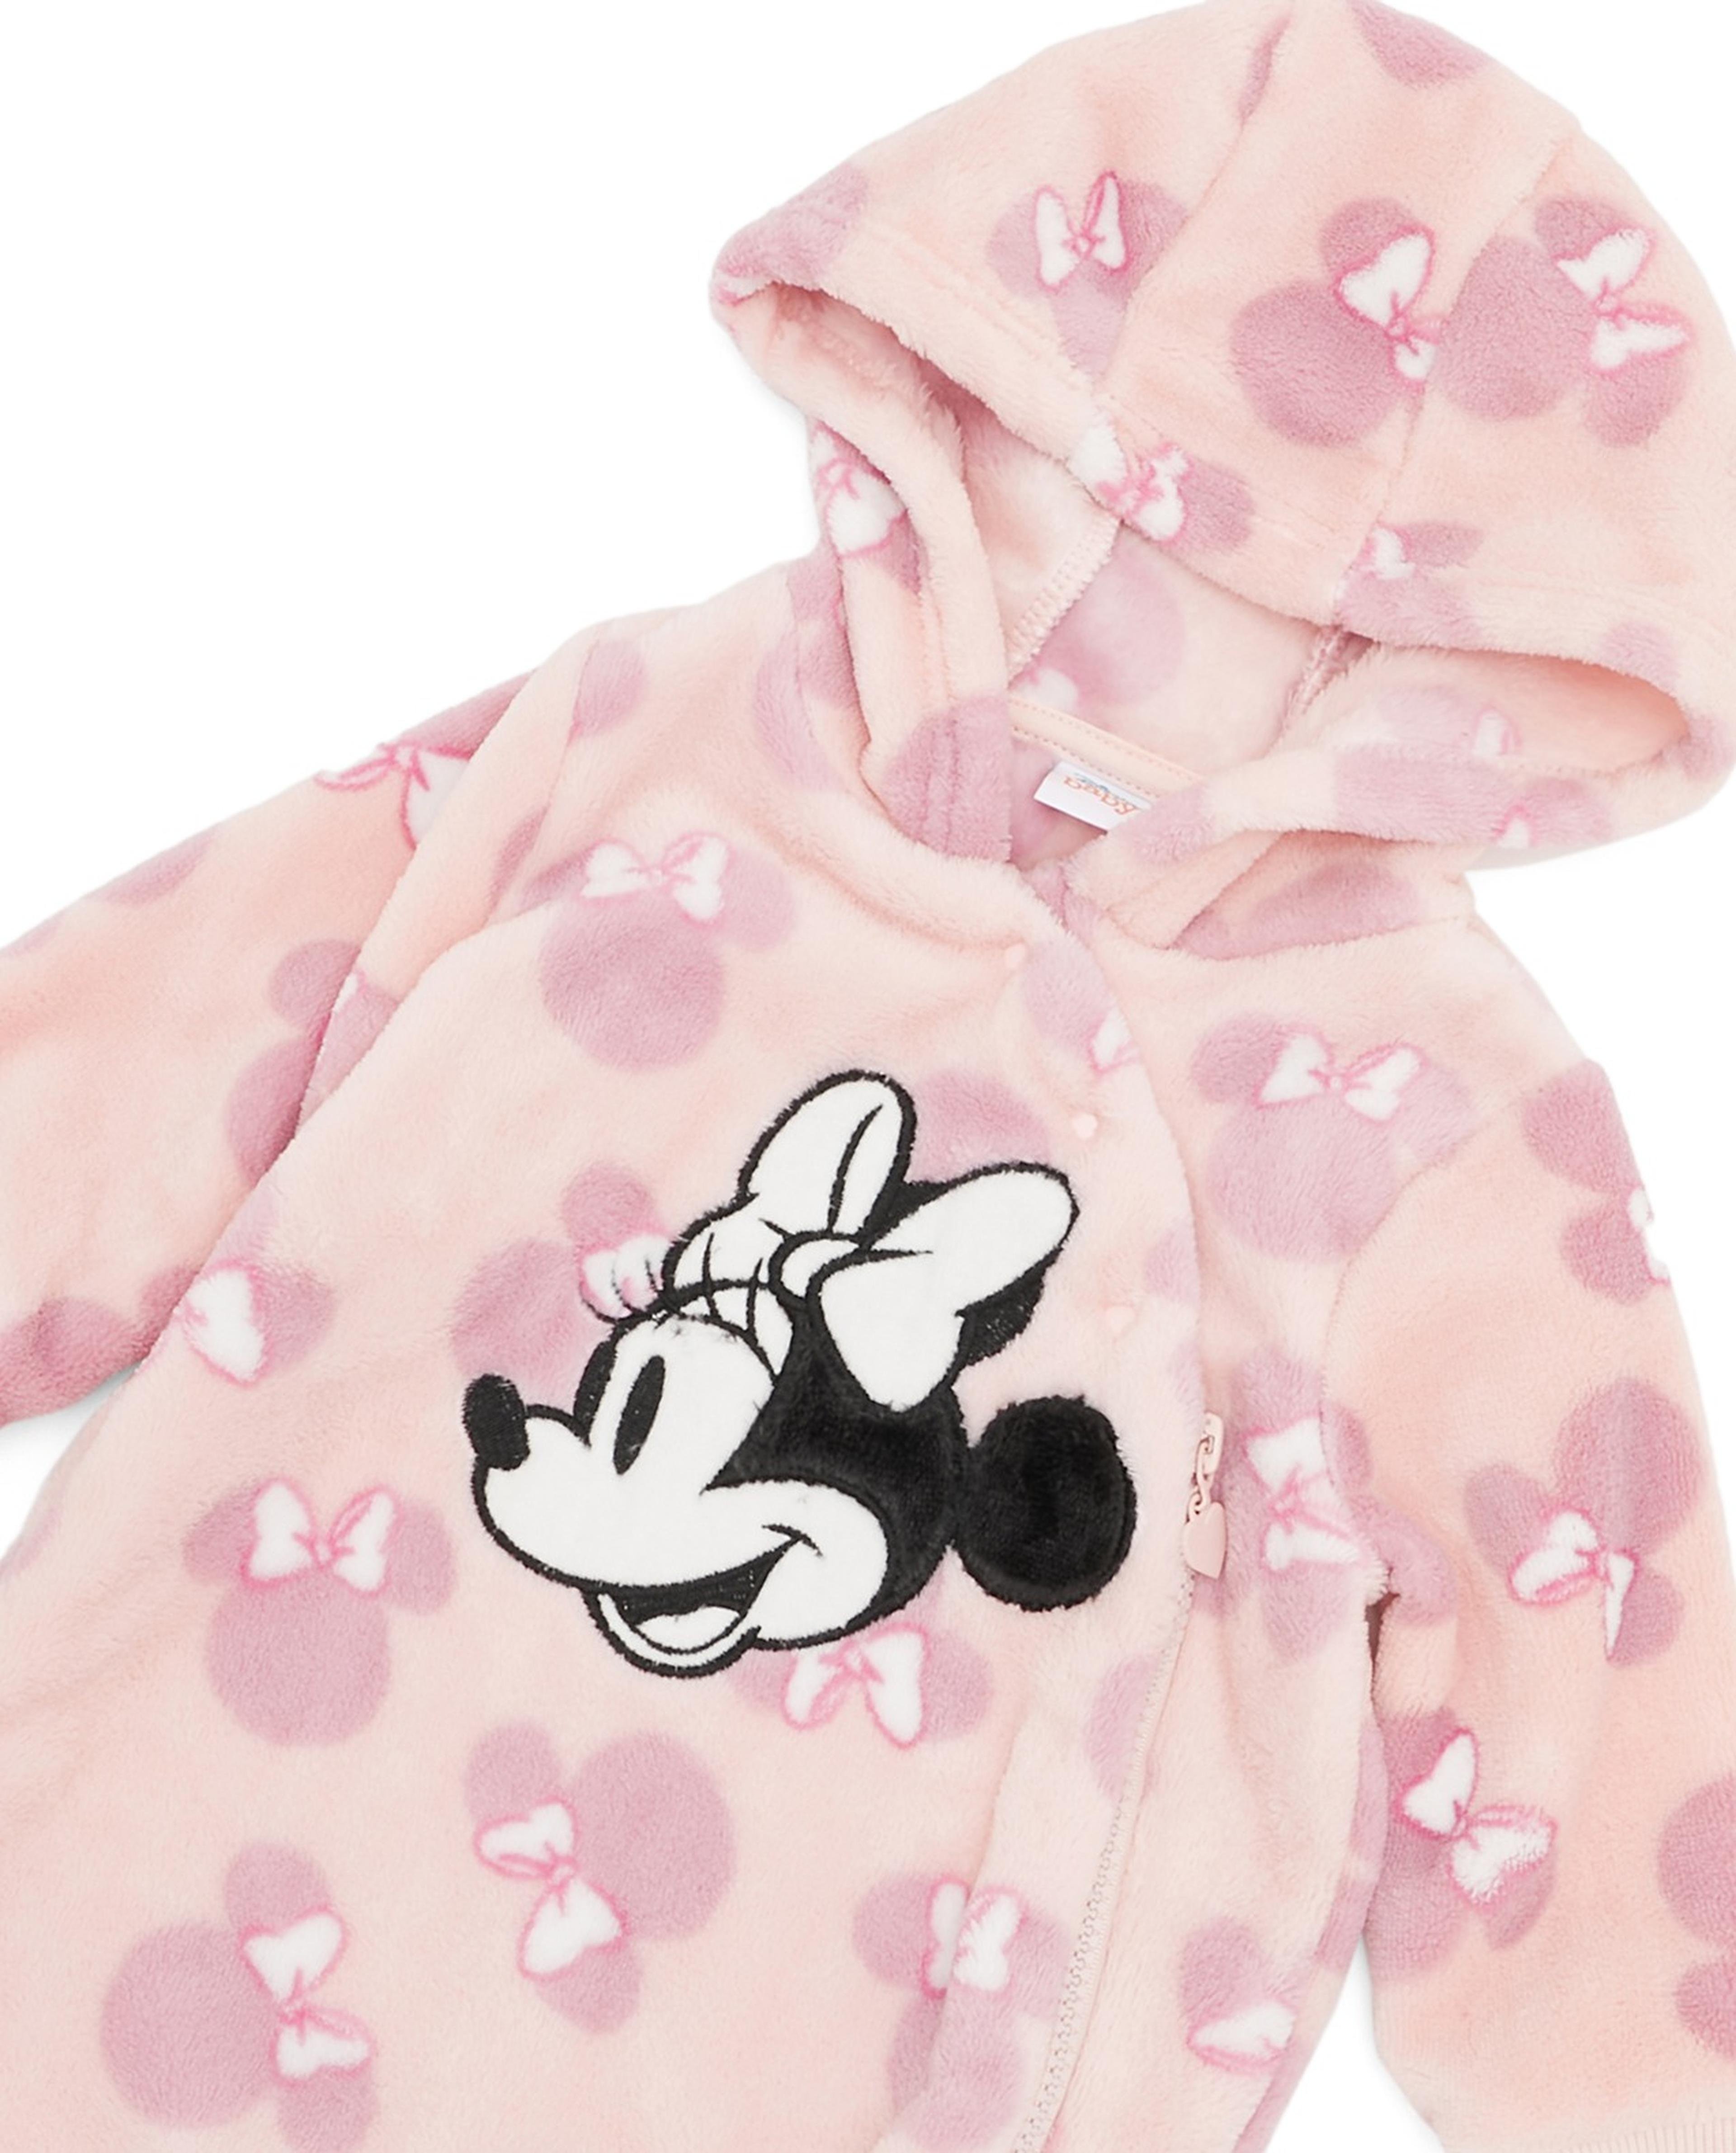 Minnie Mouse Applique Hooded Sleepsuit